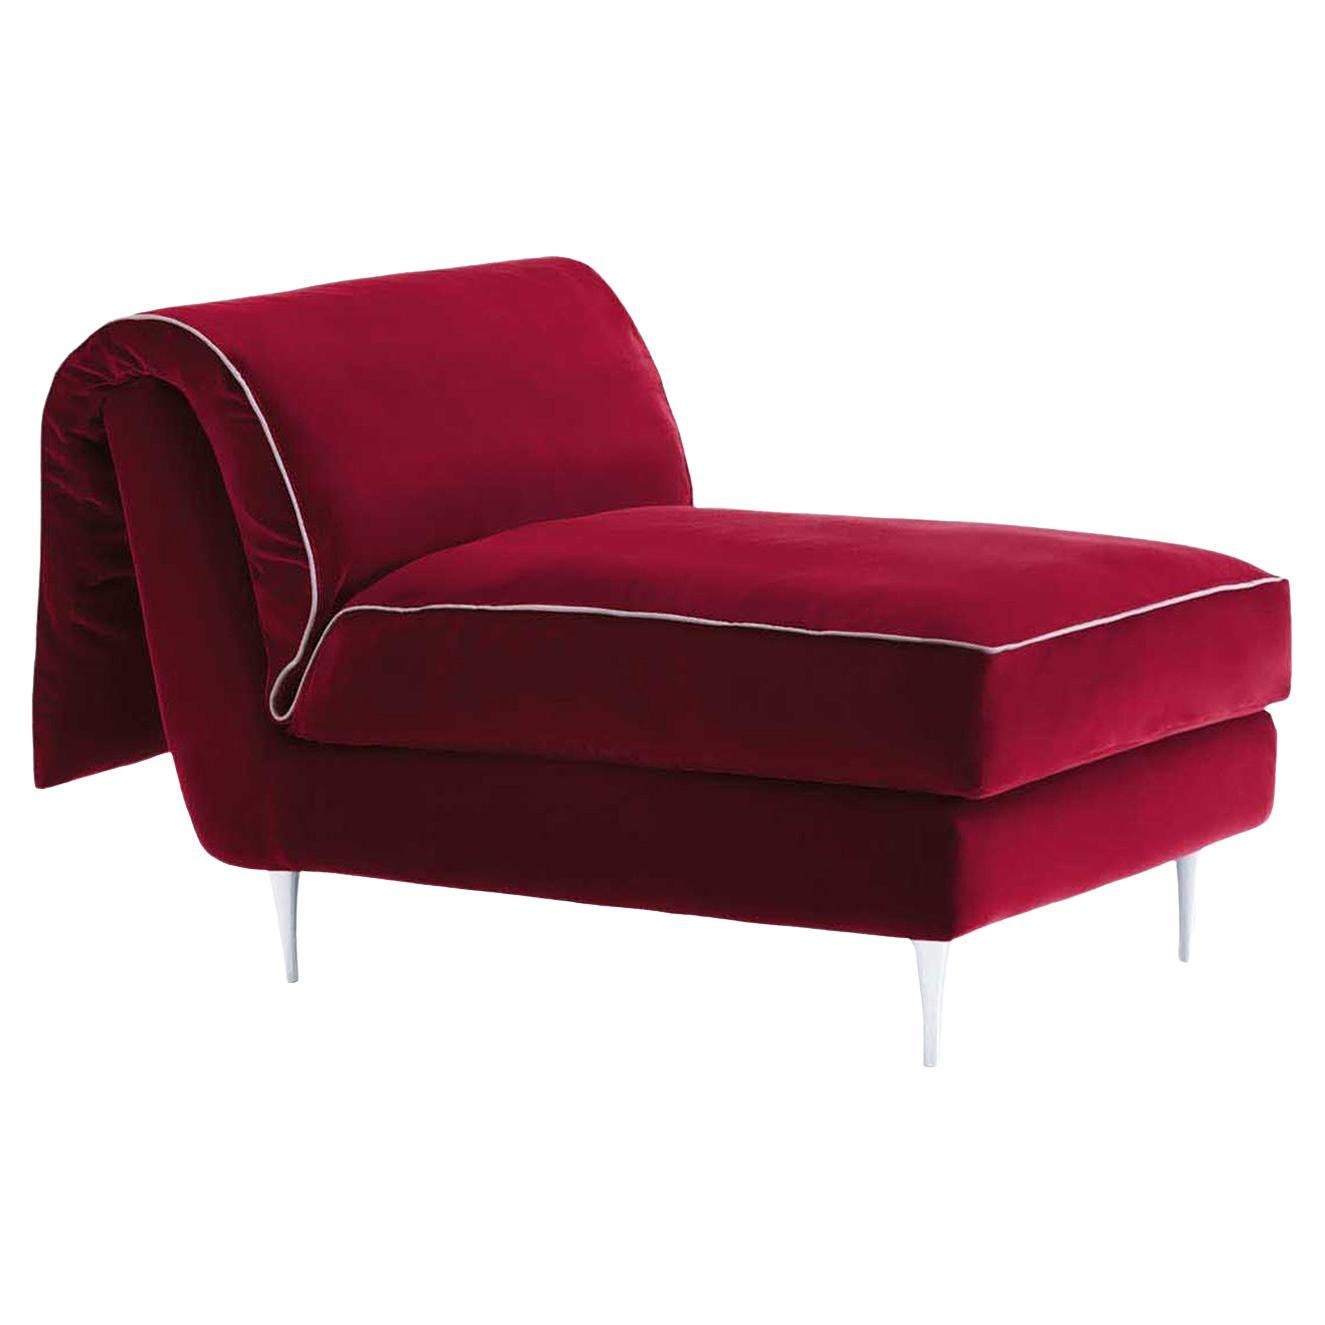 Casquet Mini in Passion Red Velvet Daybed